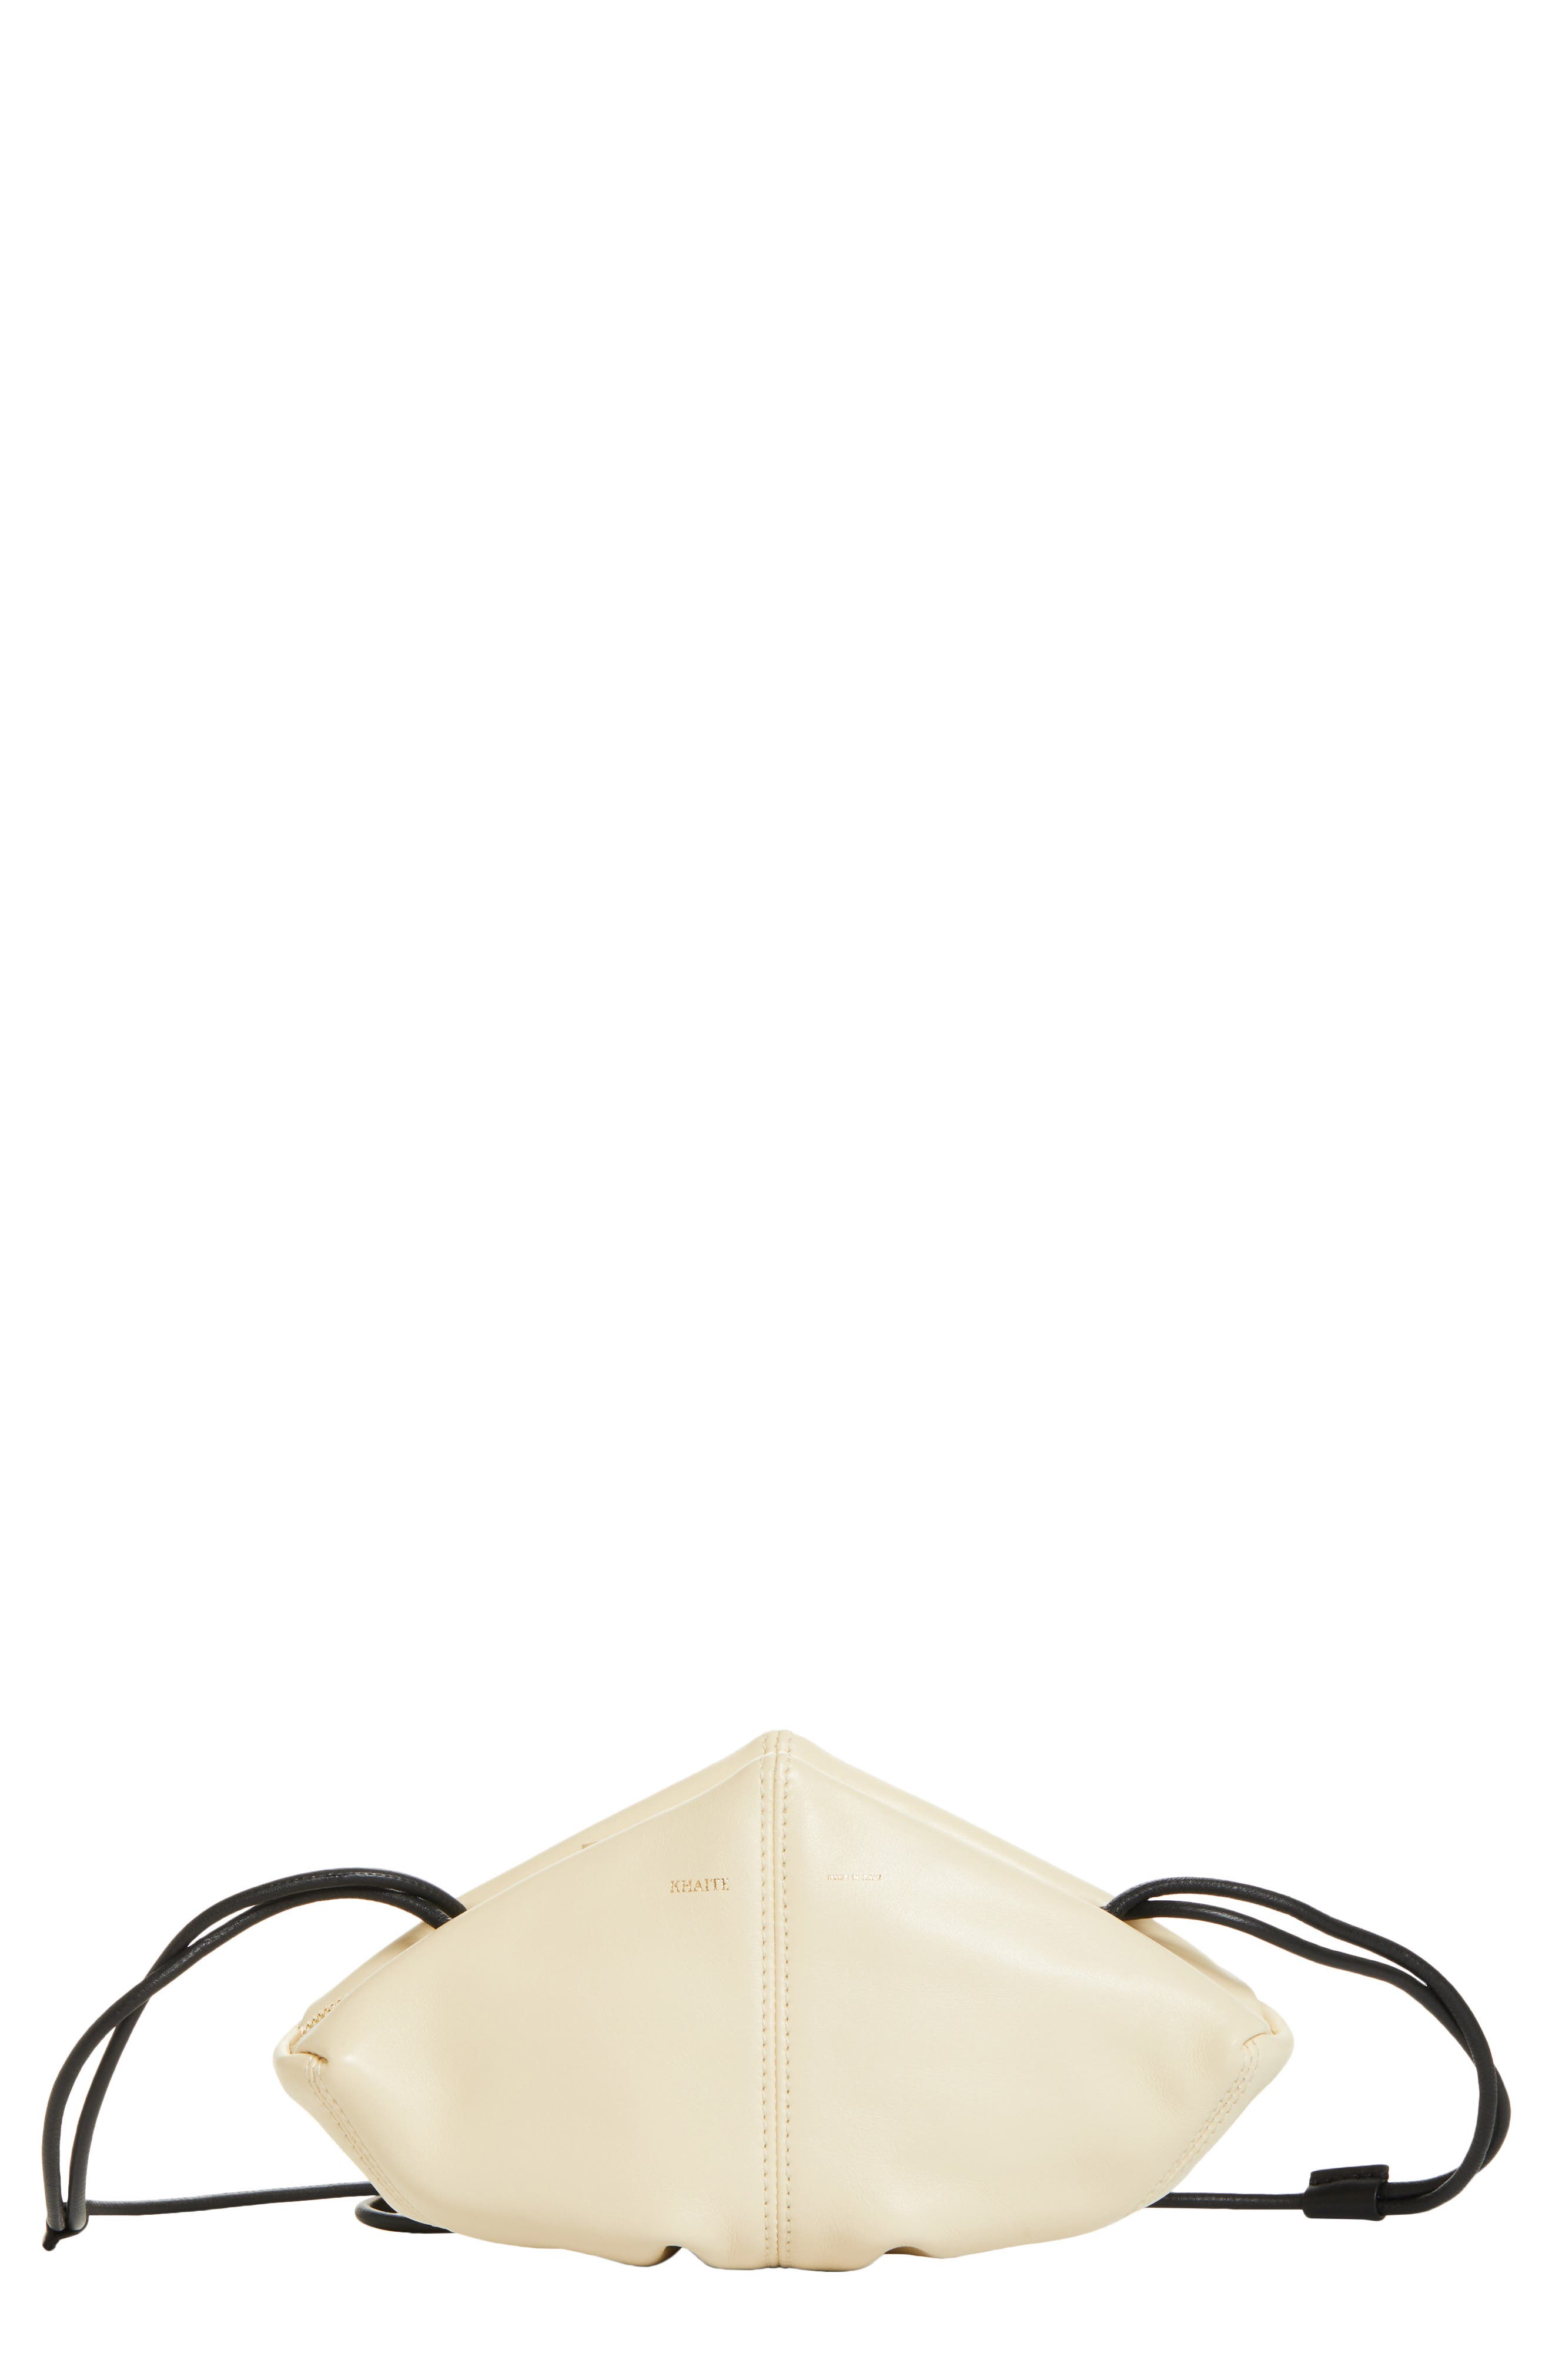 Khaite Small Edith Leather Crossbody Bag in Ivory at Nordstrom